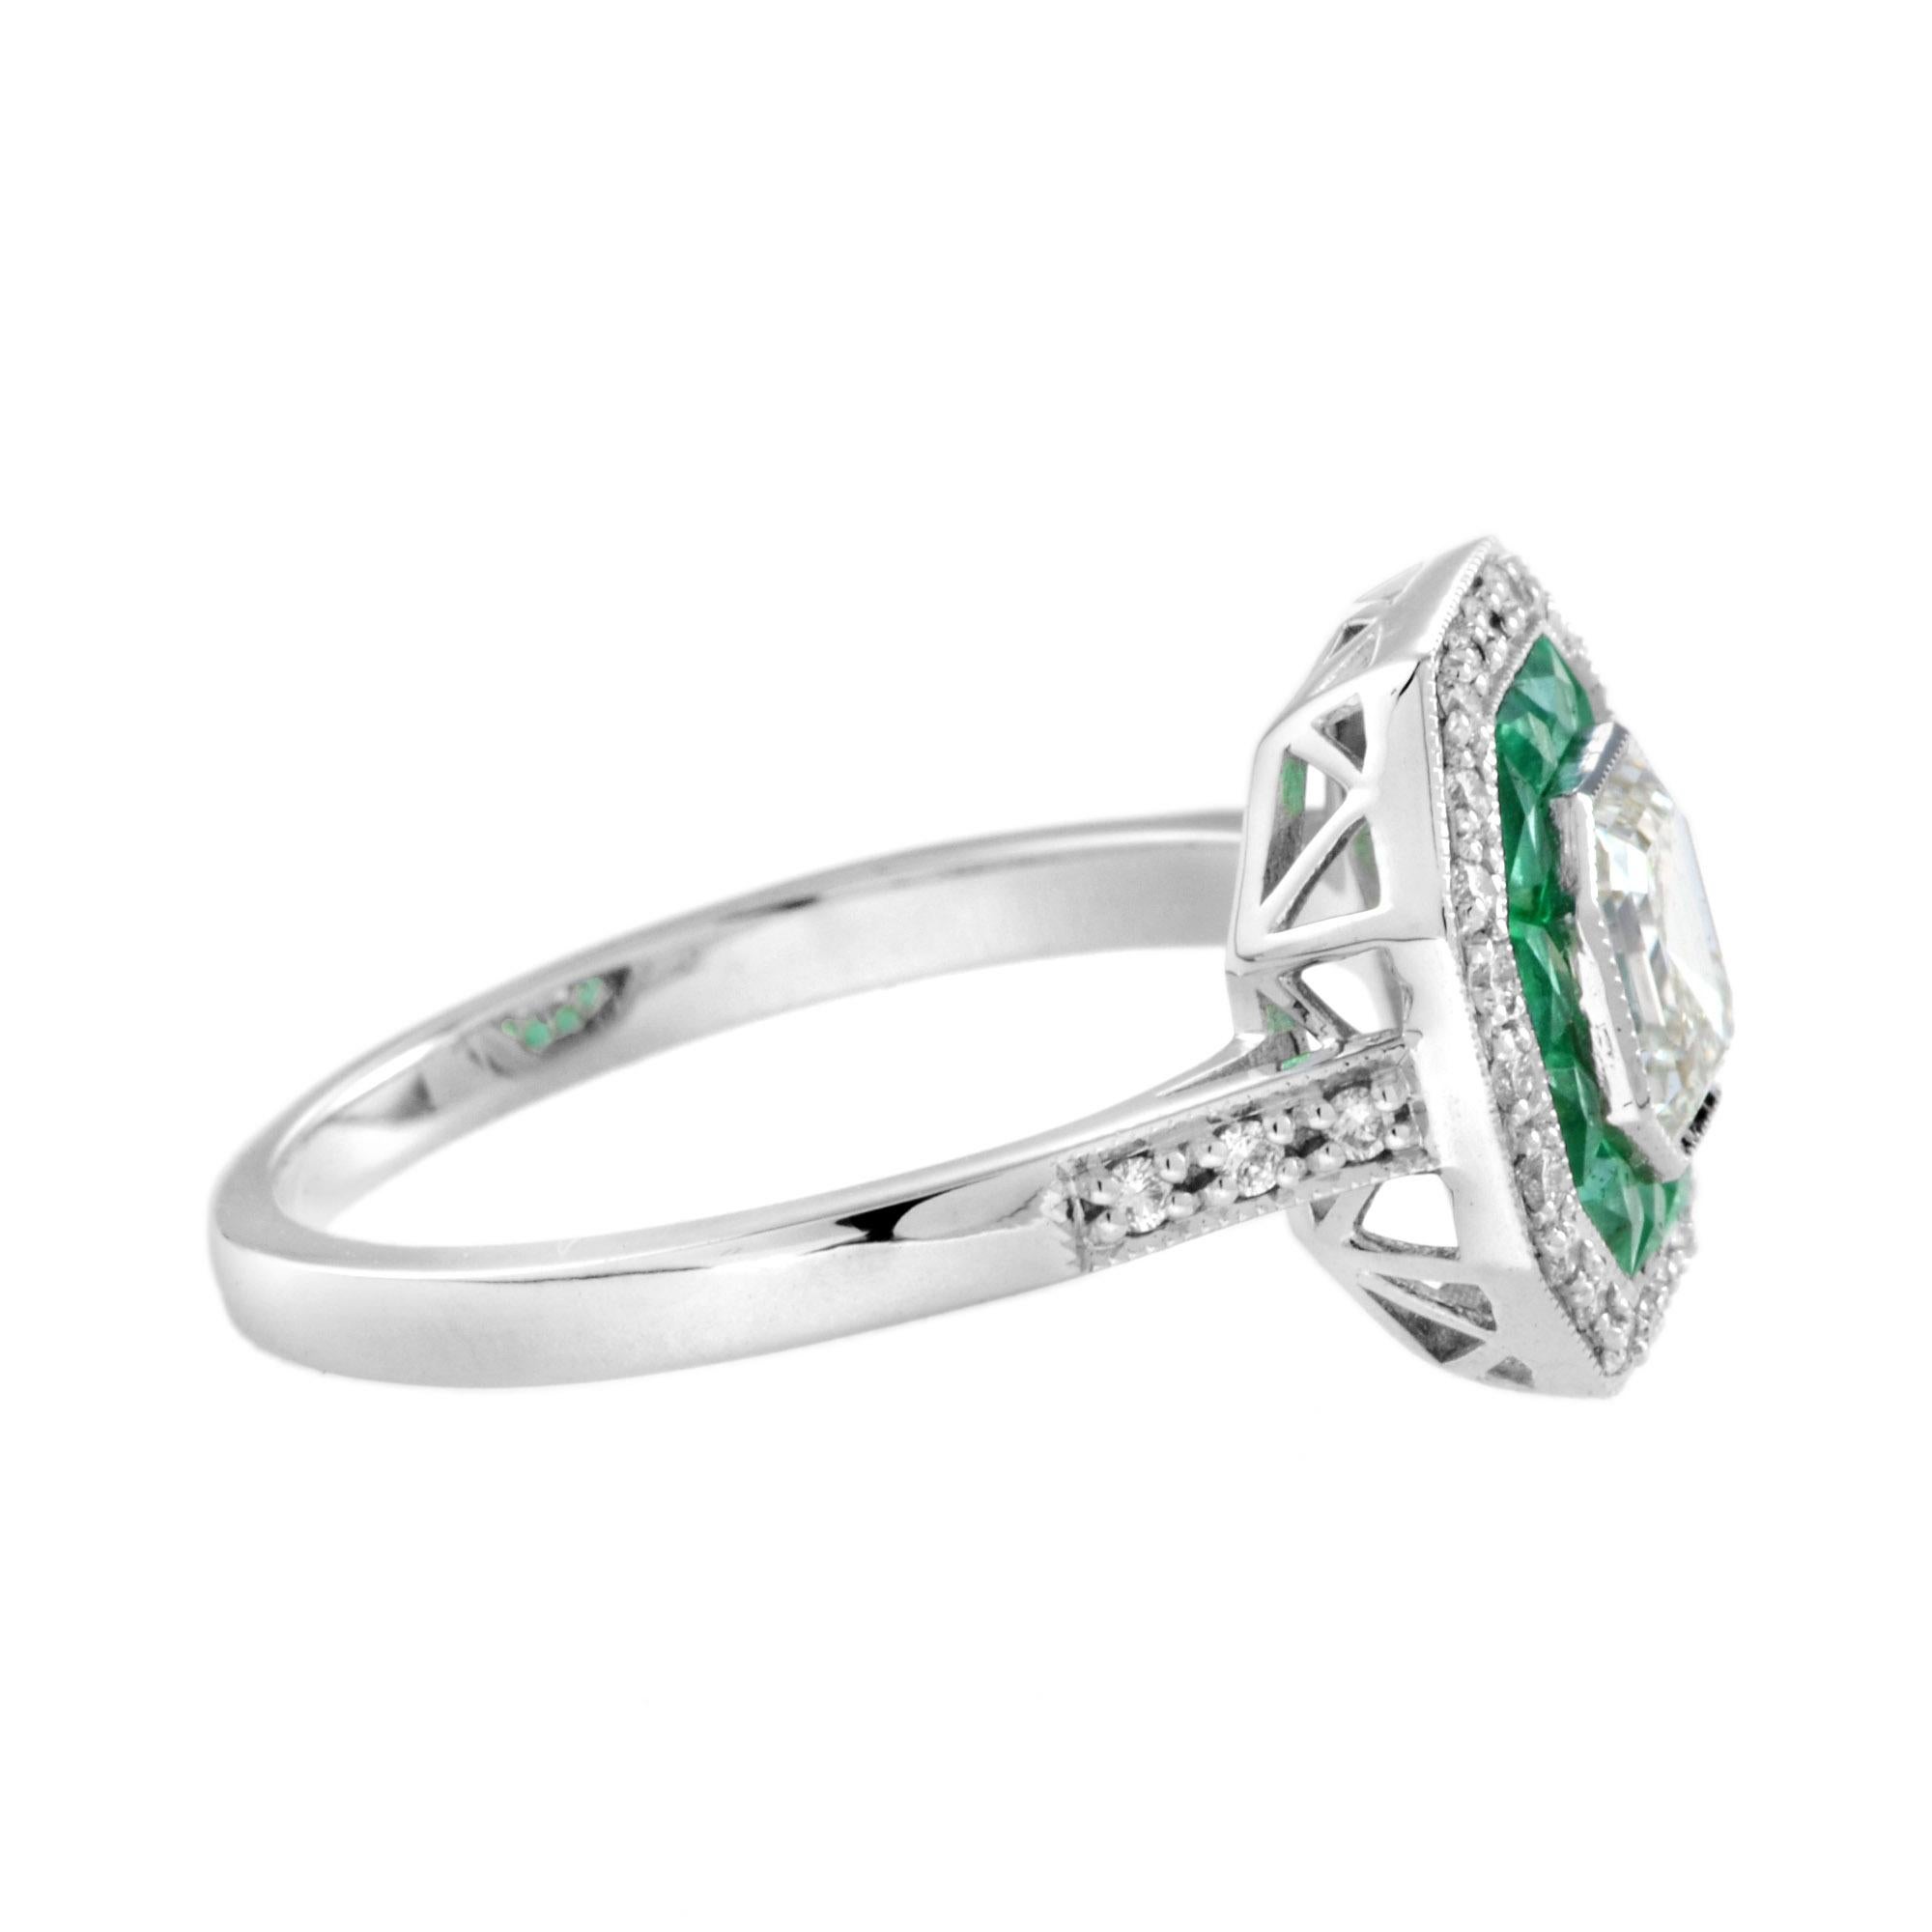 Art Deco Style Asscher Cut Diamond and Emerald Engagement Ring in 18K White Gold For Sale 1